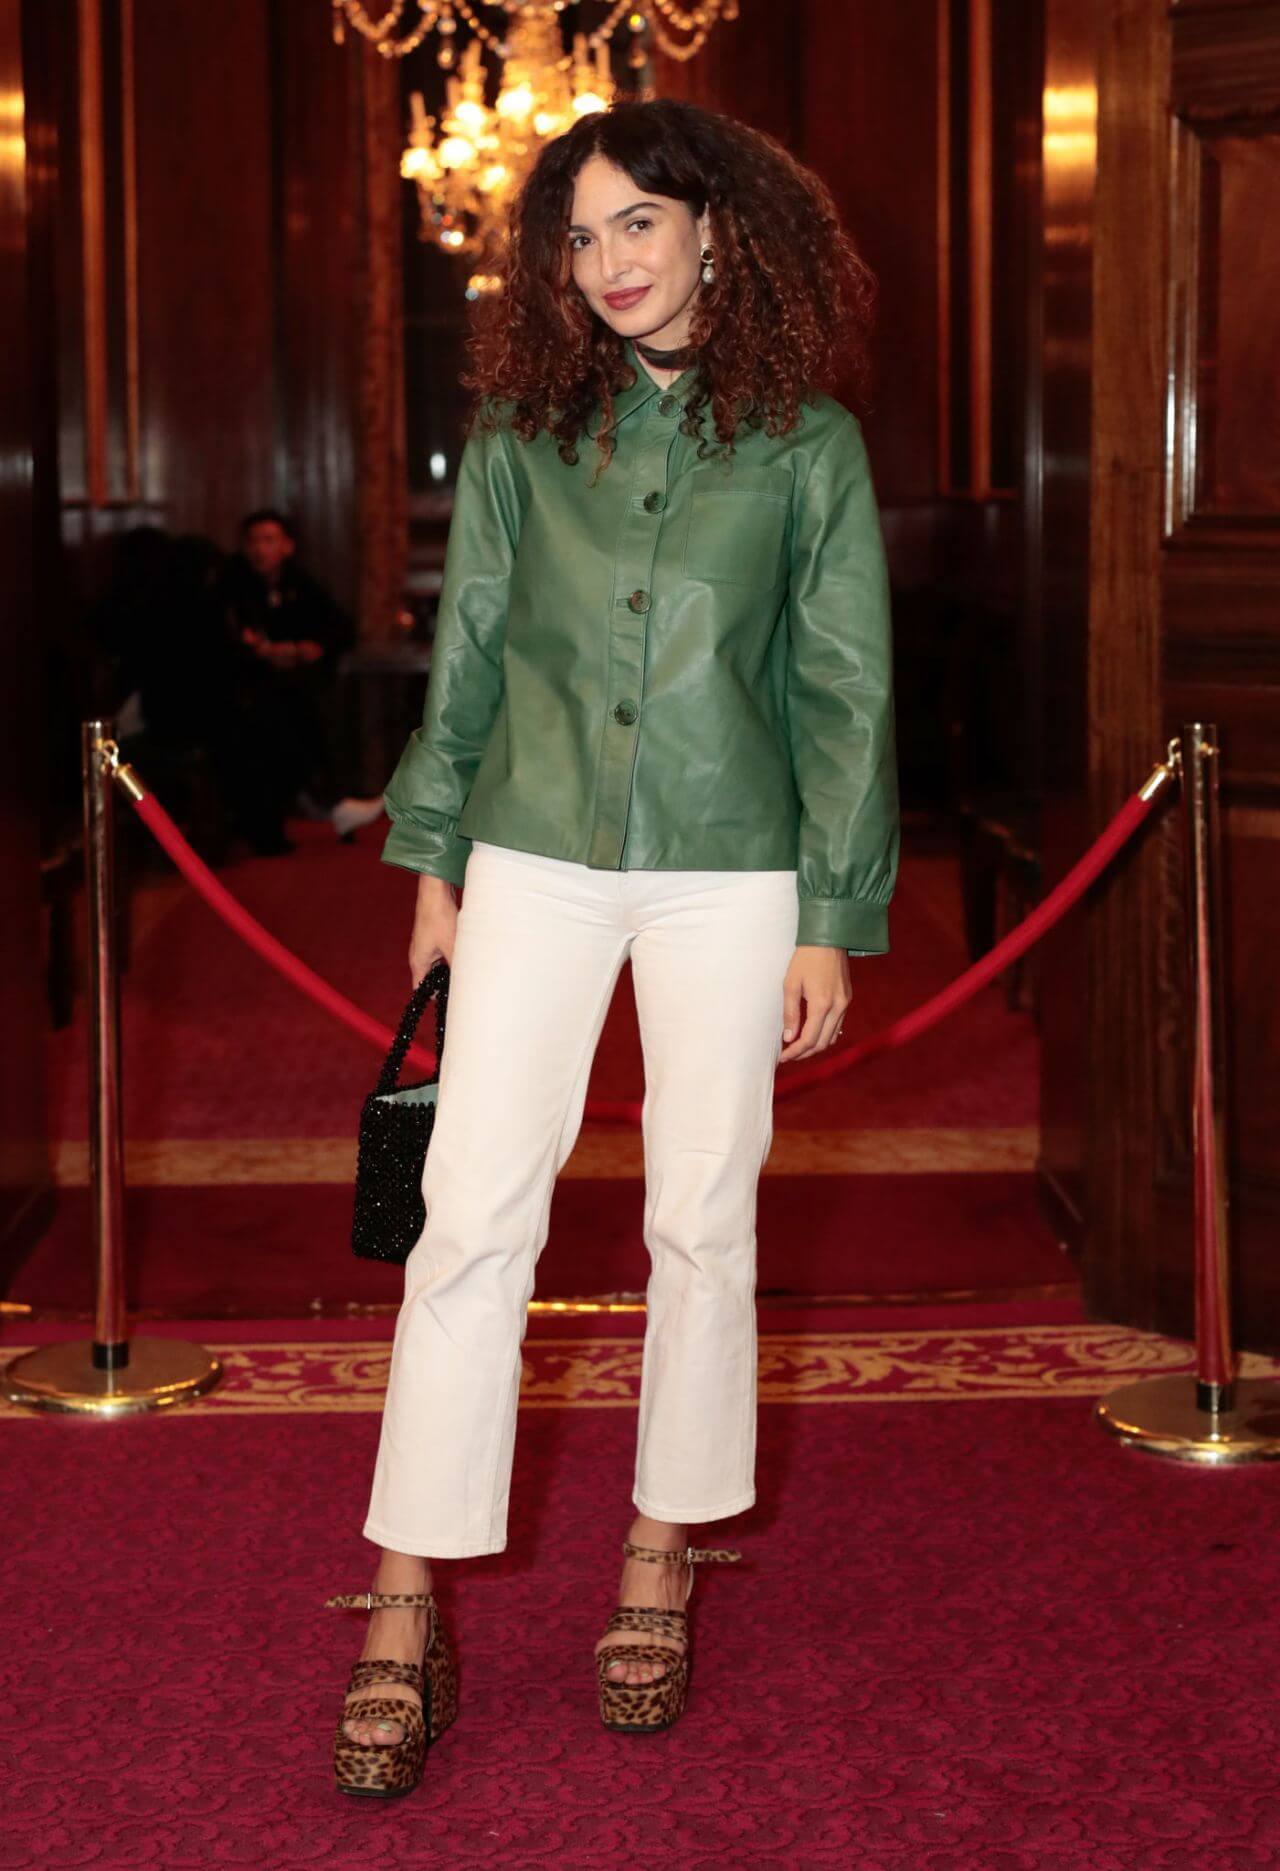 Anna Shaffer In Green Leather Shirt With White Pants At RIXO Presentation In London Fashion Week